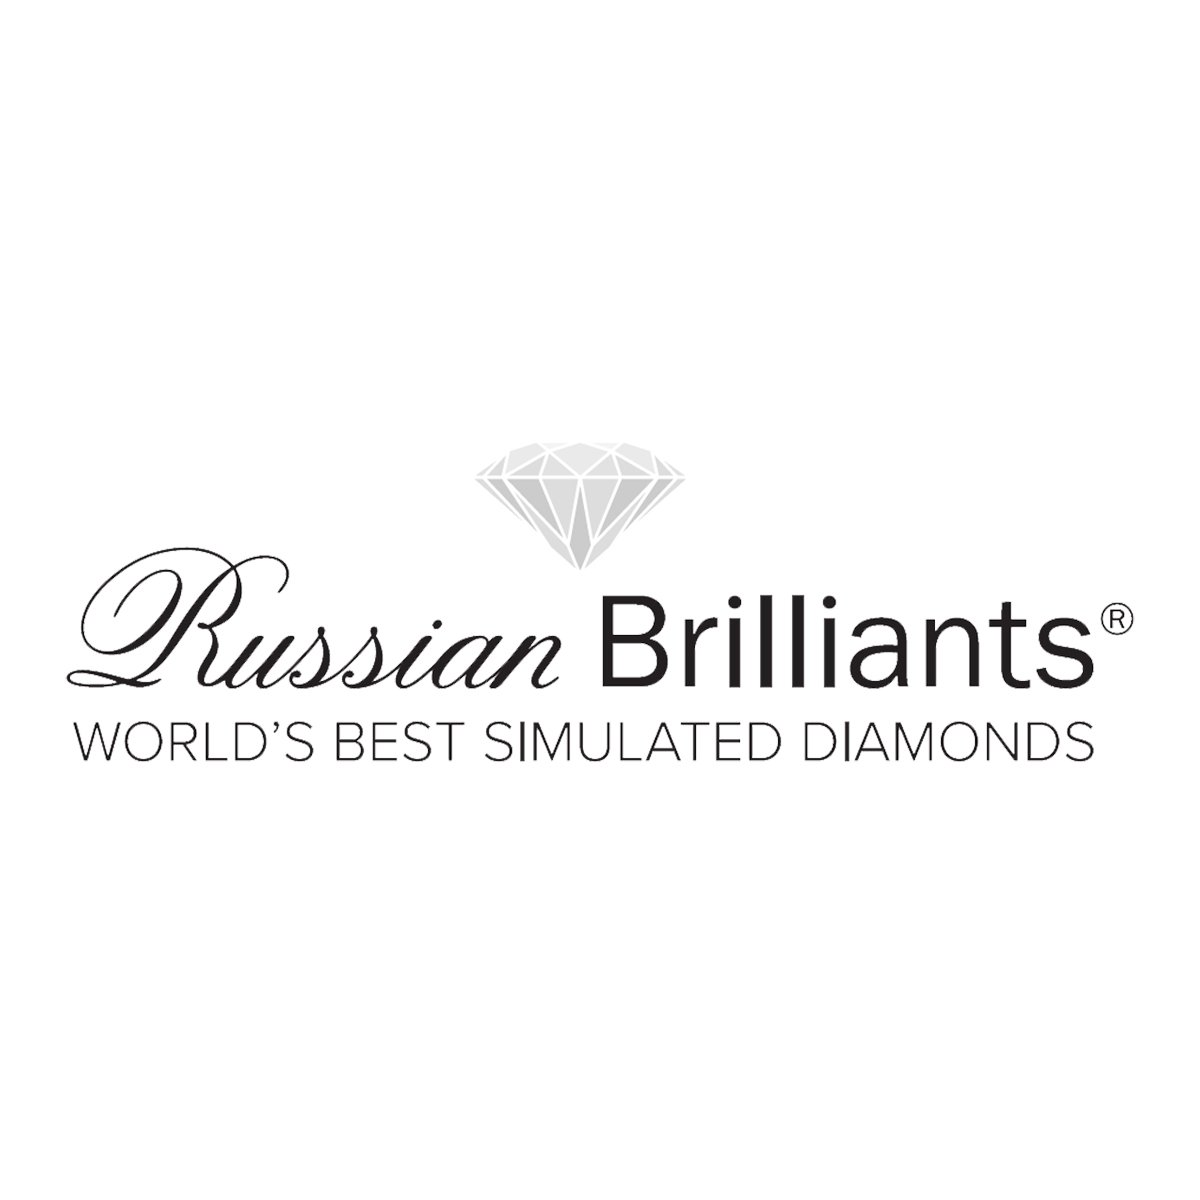 Russian Brilliants® offers simulated diamonds of the finest quality set in custom creations to commemorate clients’ special moments.